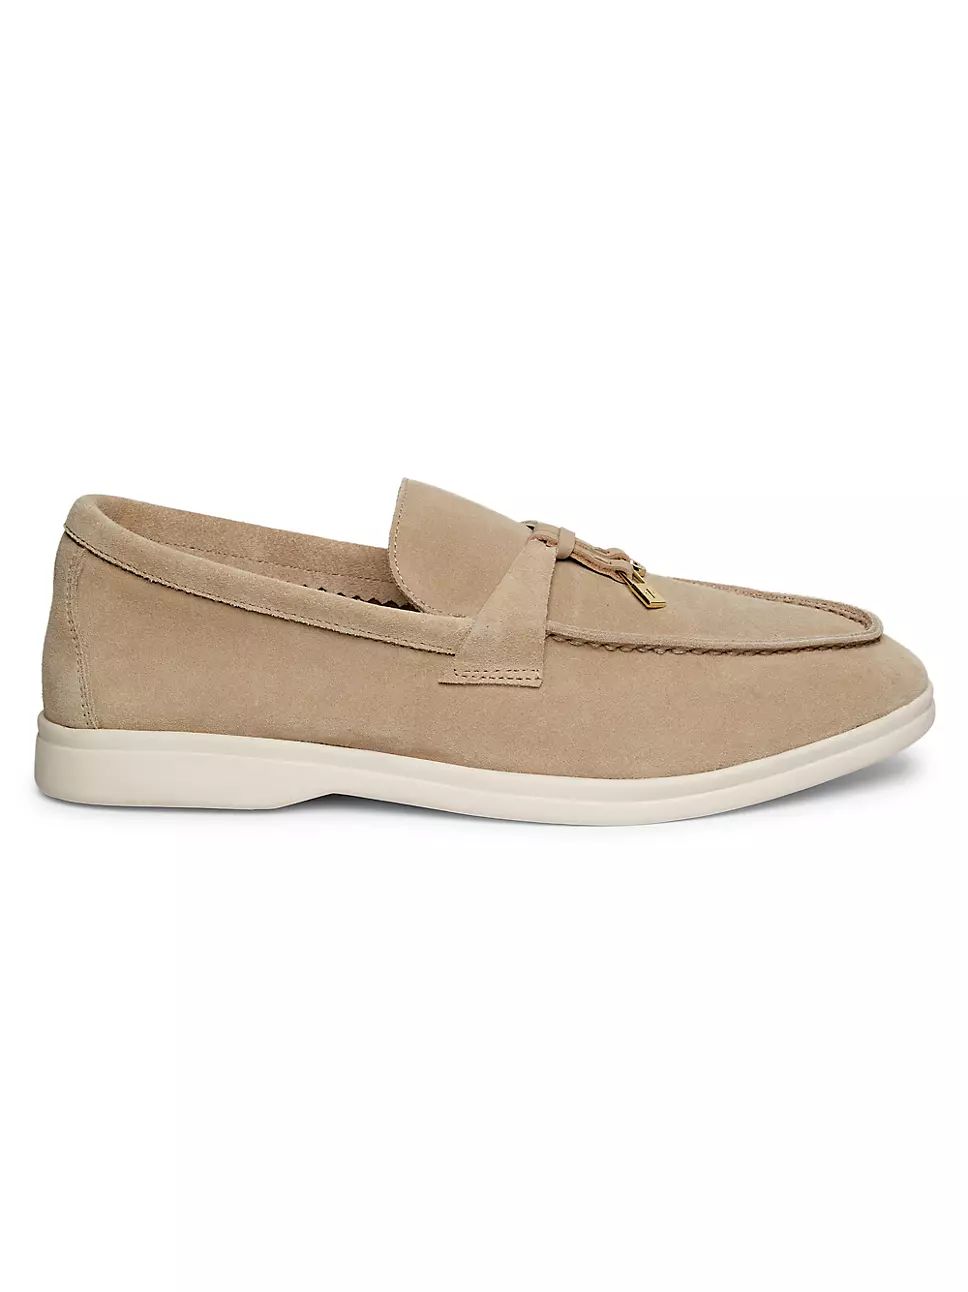 Summer Charms Walk Suede Moccasins | Saks Fifth Avenue